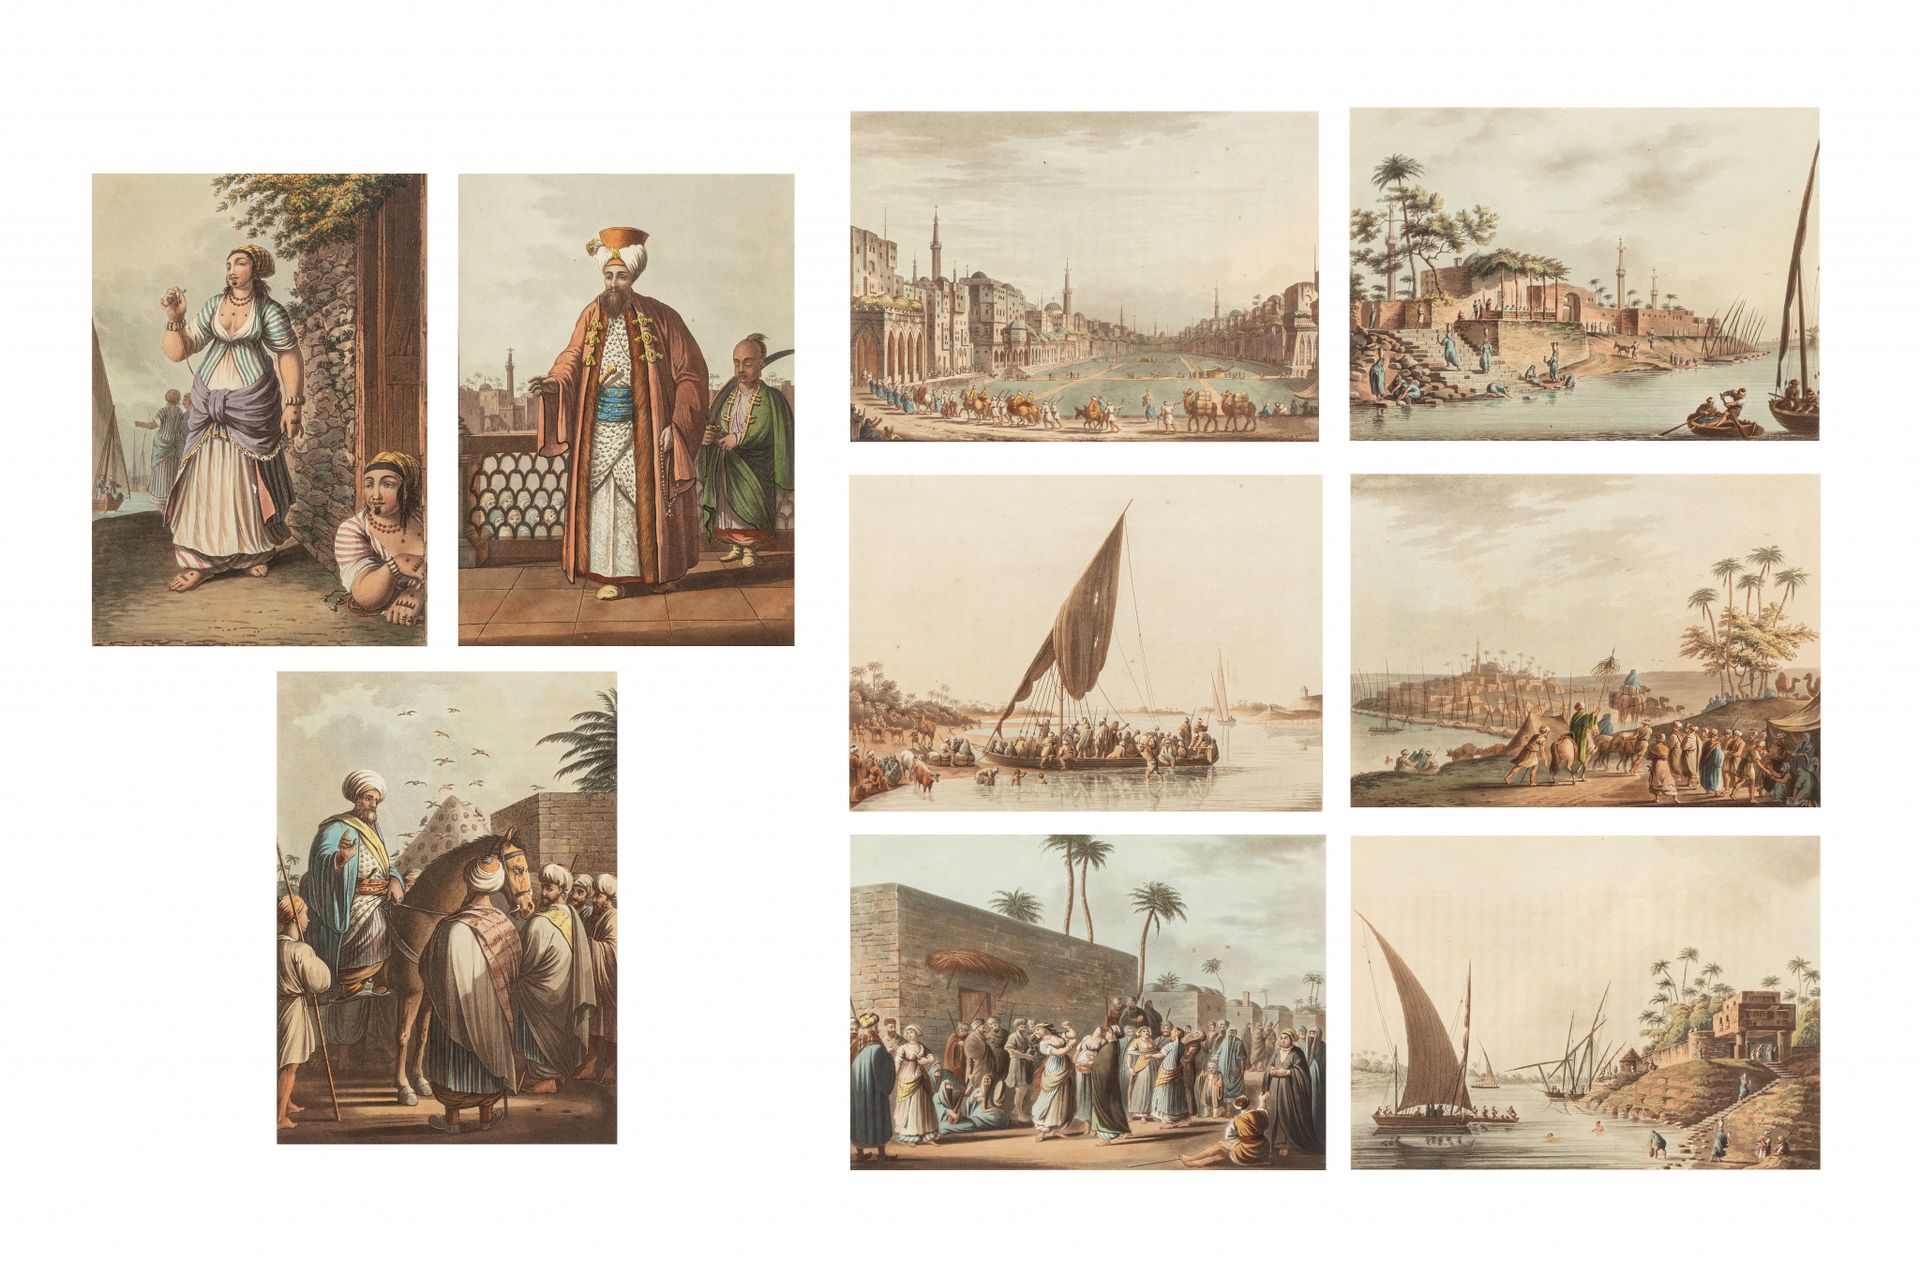 Neuf gravures sur l'Egypte Londra, 1802, a cura di Robert Bowyer (1758-1834)

In&hellip;